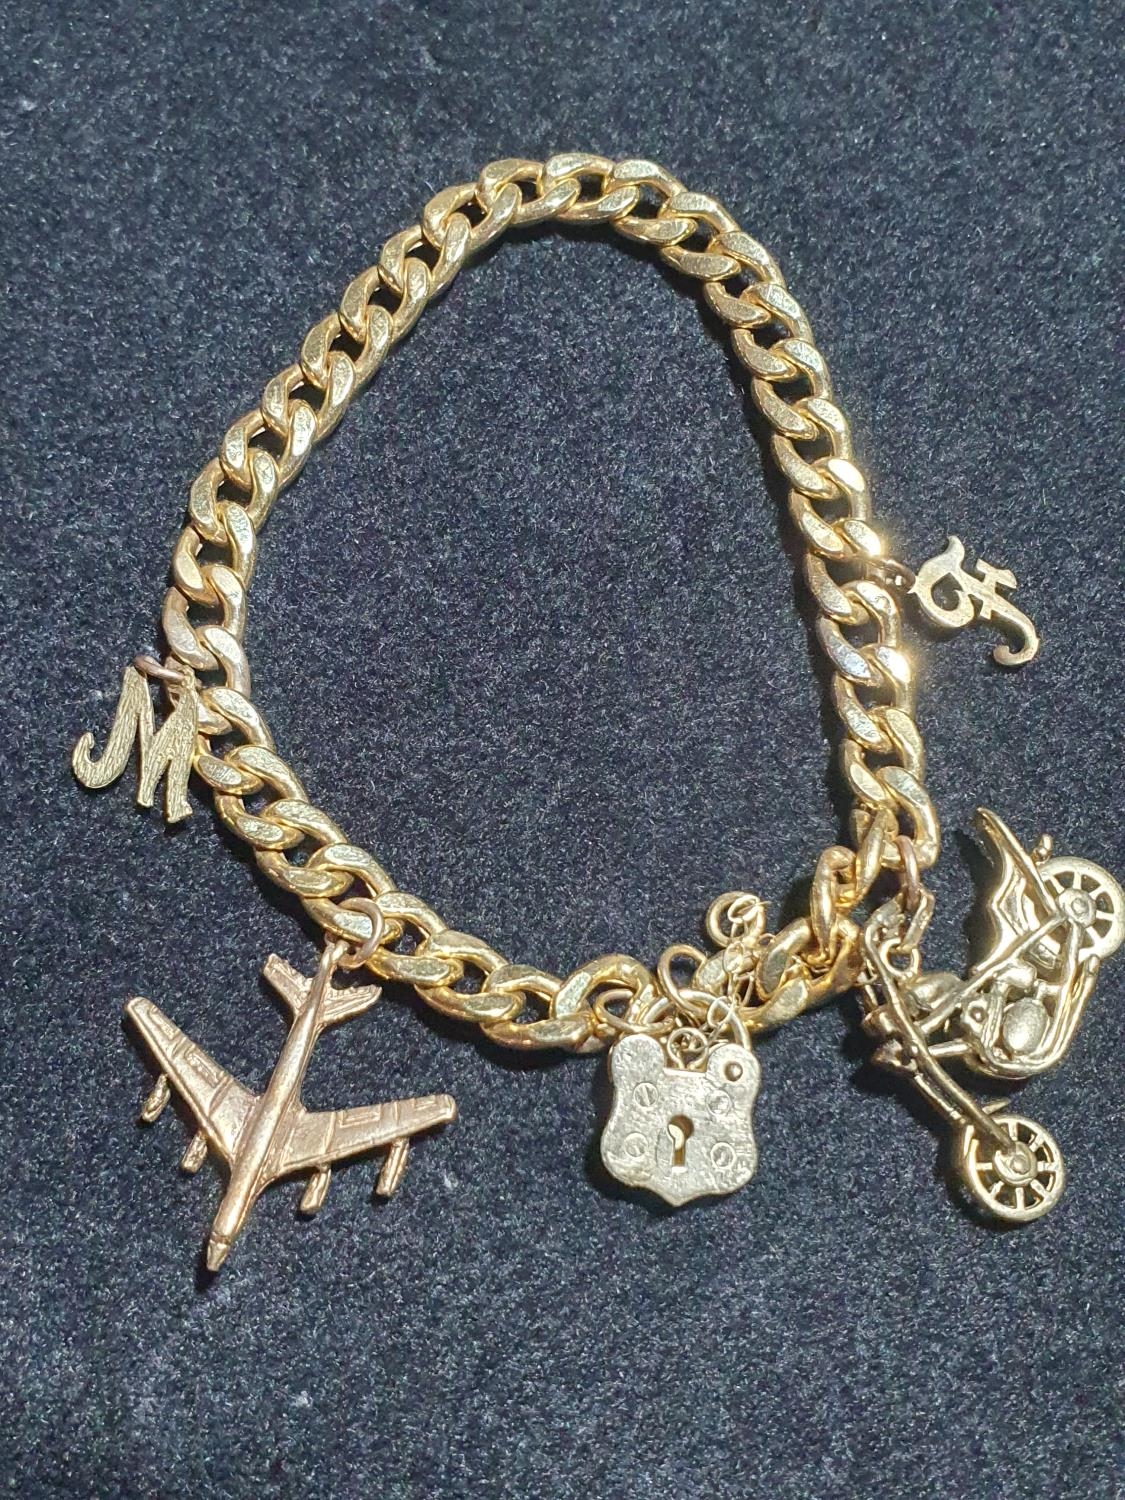 A 9ct gold bracelet with yellow metal charms. Gross weight 10.6g